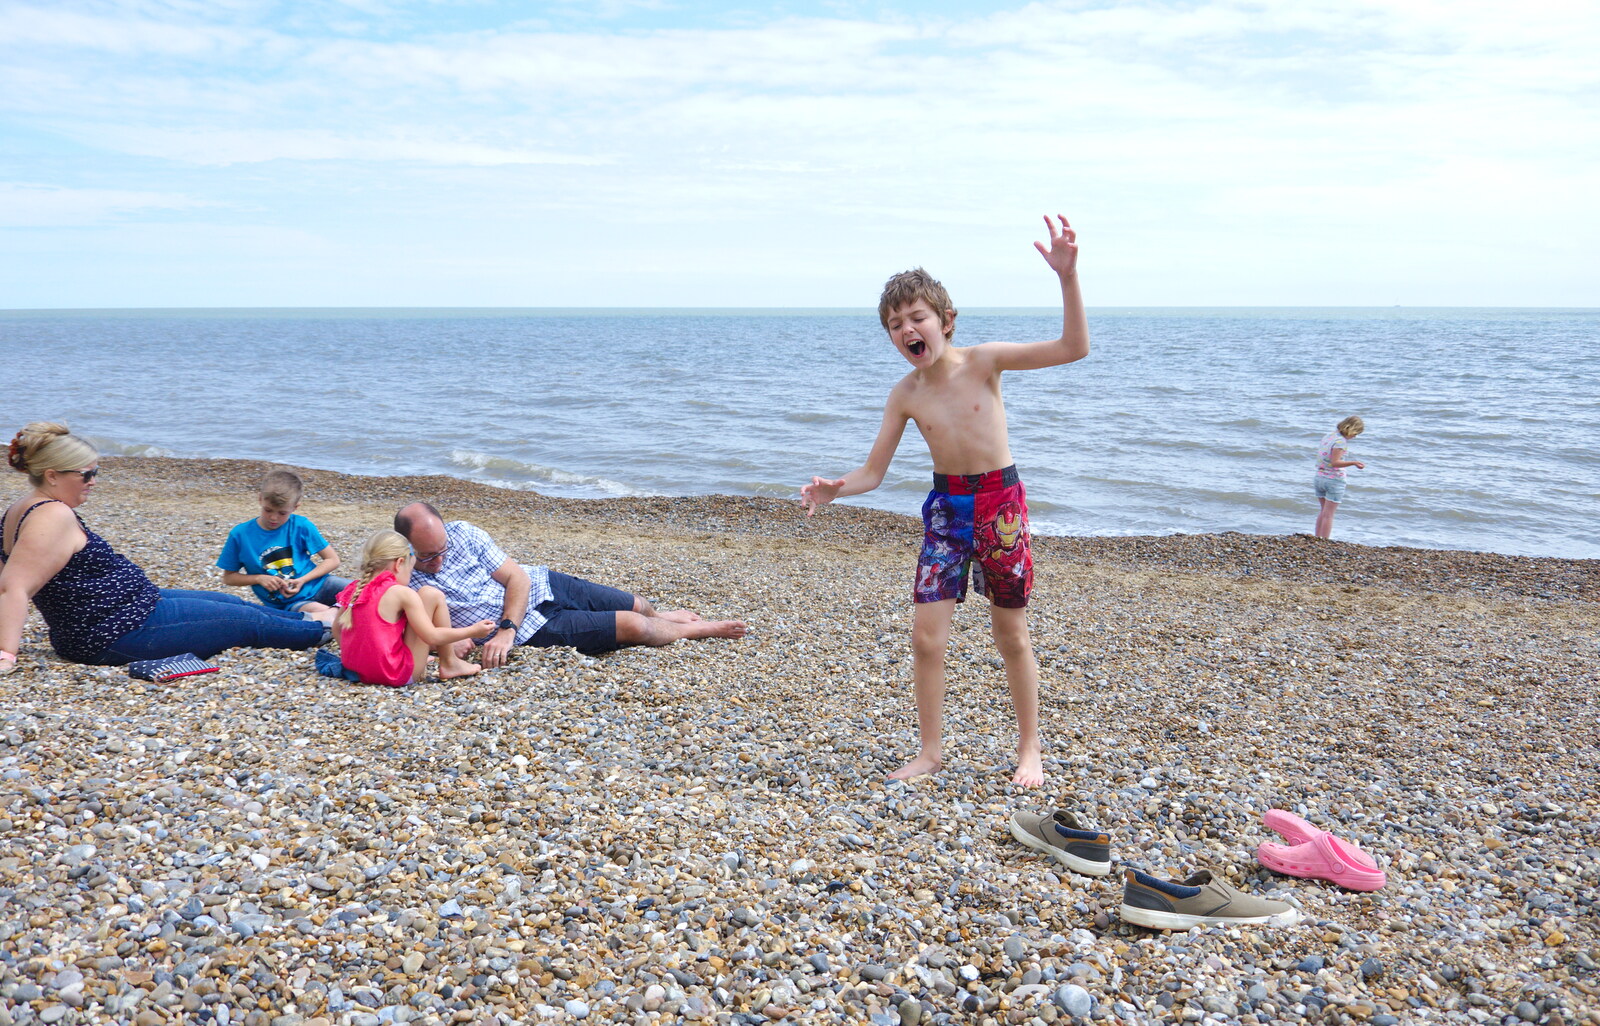 Fred's finding it hard going on the shingle beach from Cliff House Camping, Dunwich, Suffolk - 15th June 2019